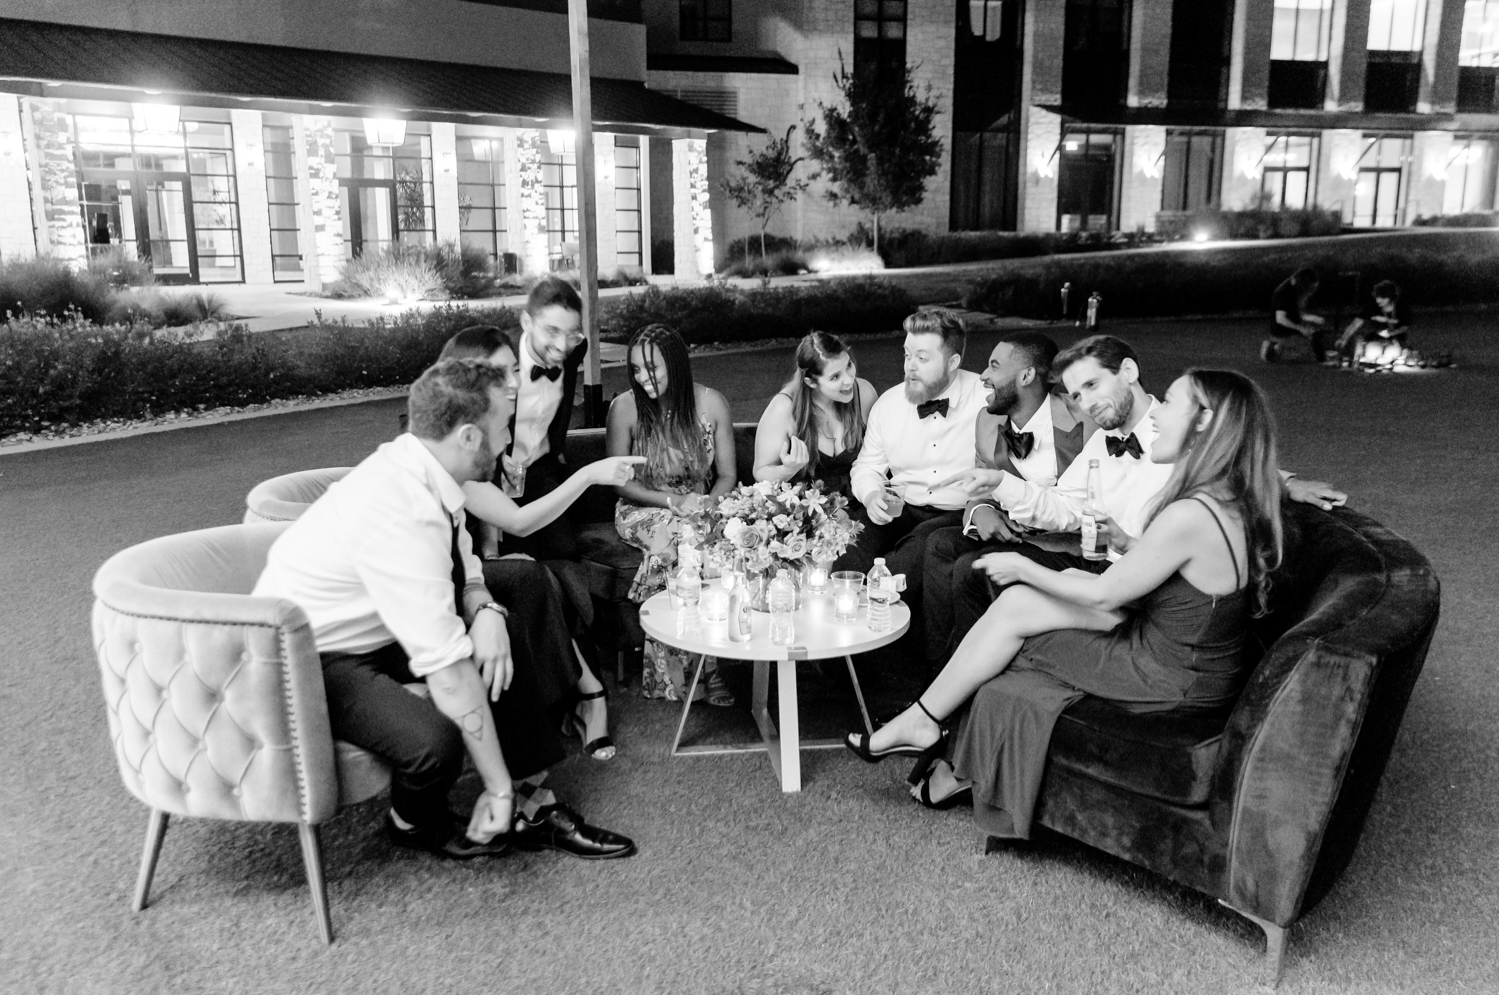 Guests sit at the velvet furniture rentals and chat outside during the reception.